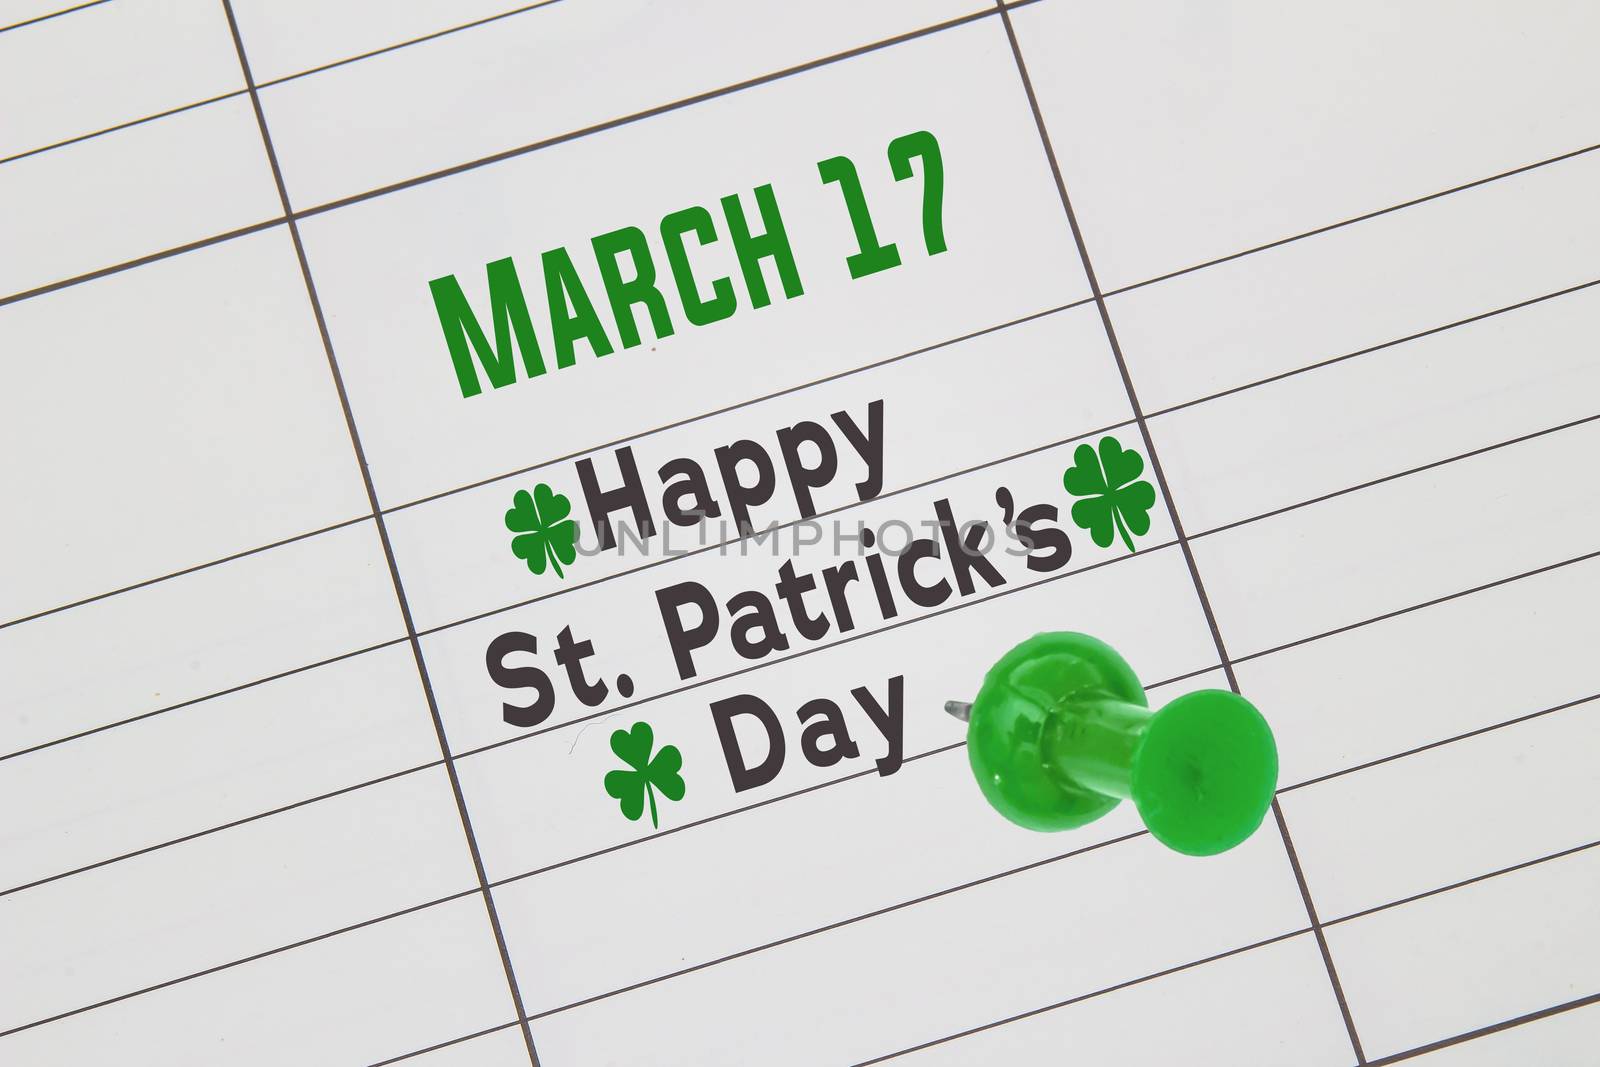 A close up of a calendar on March 17 with the text: Happy St. Patrick's Day